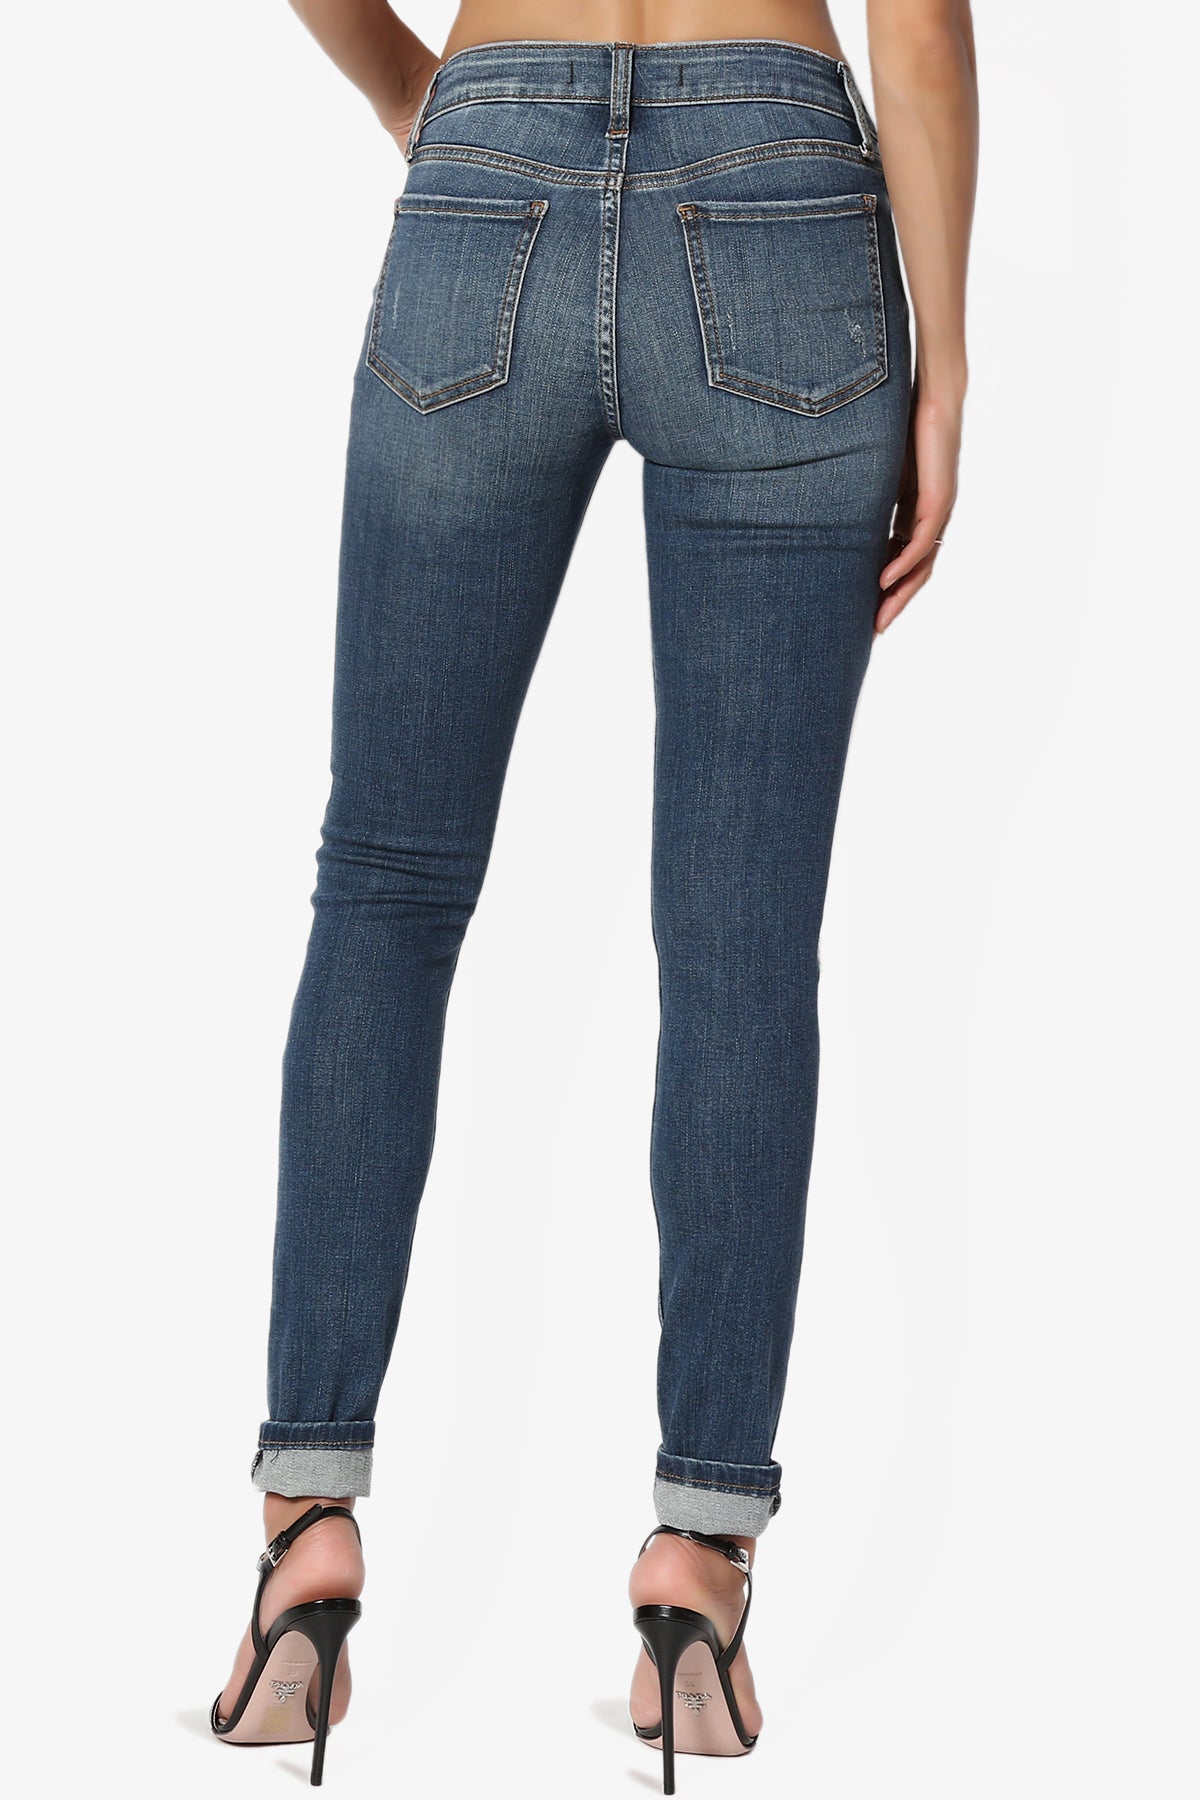 Load image into Gallery viewer, Jude Mid rise Anke Skinny Jeans in Suspect DK DARK_2
